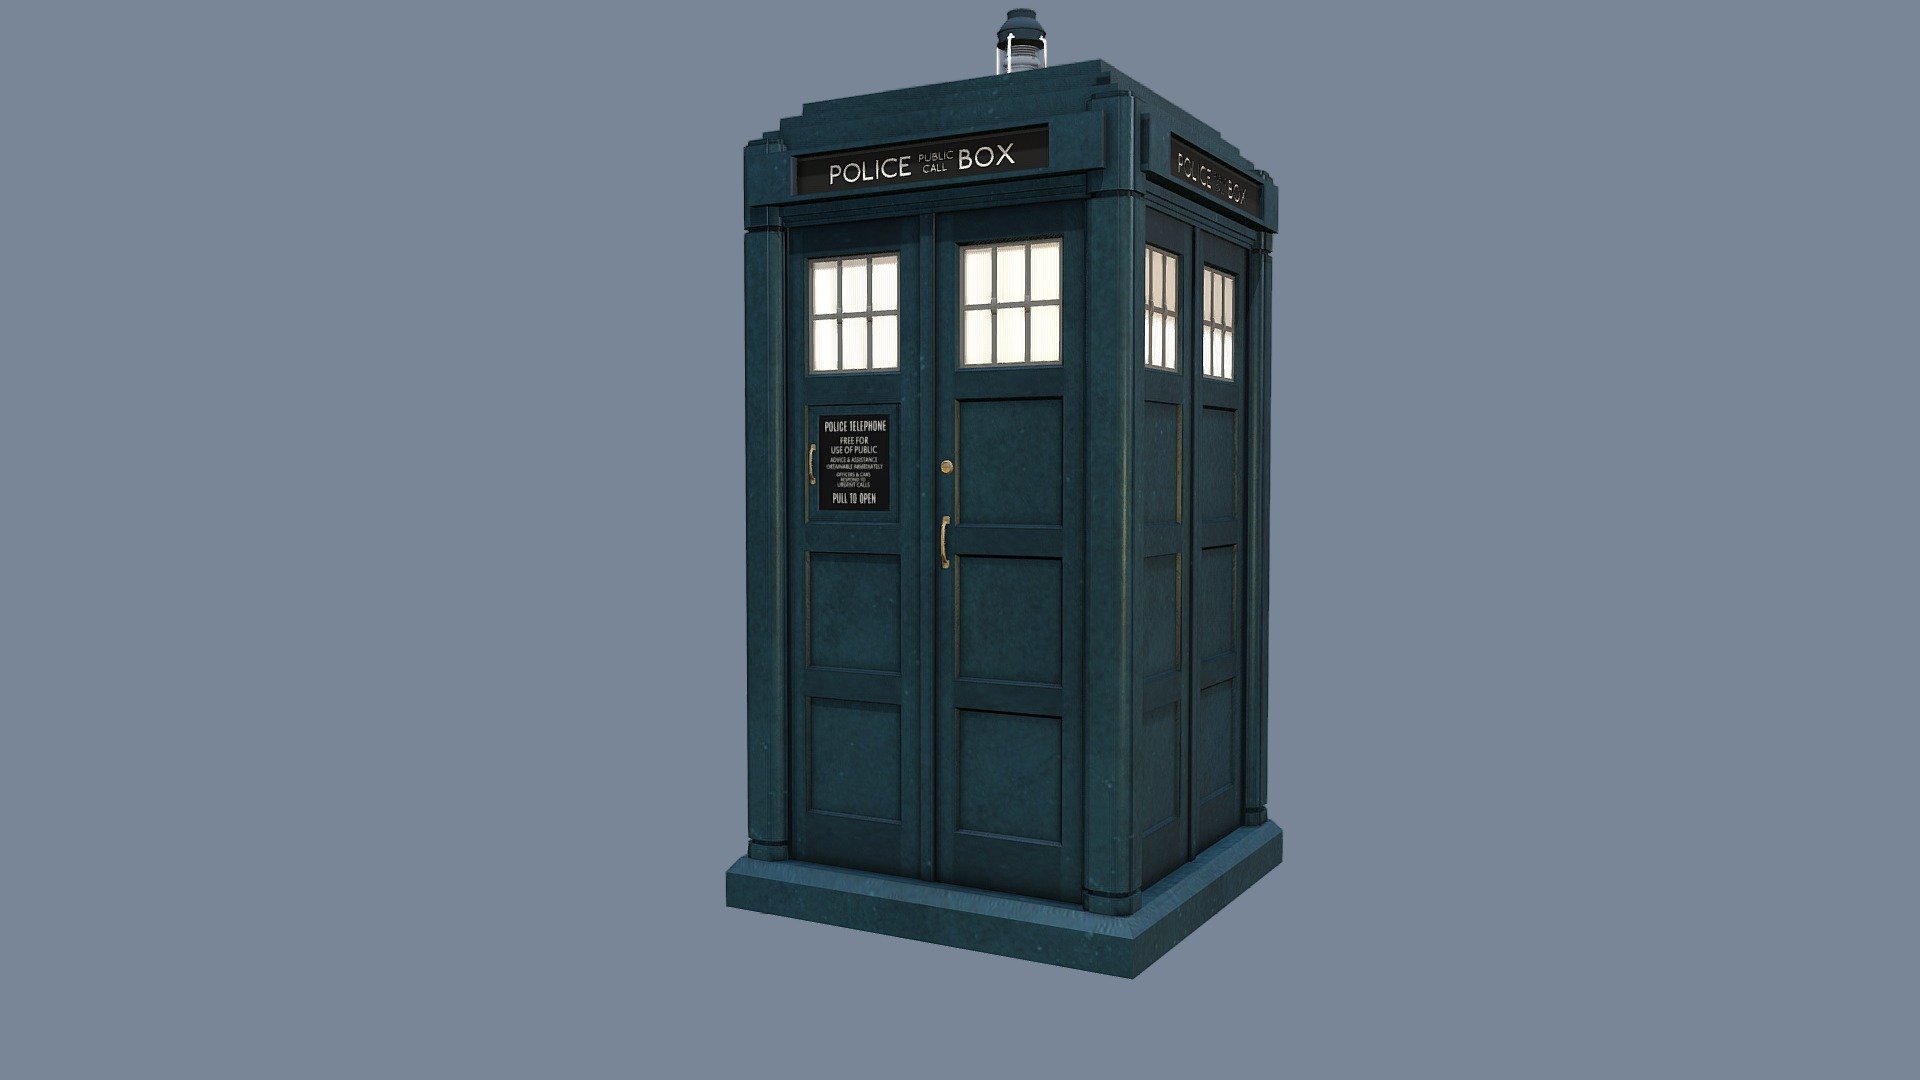 Doctor Who TARDIS Exterior, used by Jodie Whittaker, David Tennant, and Ncuti Gatwa - 2018 - Present TARDIS Exterior - 3D model by JorJ (@jorjjest) 3d model